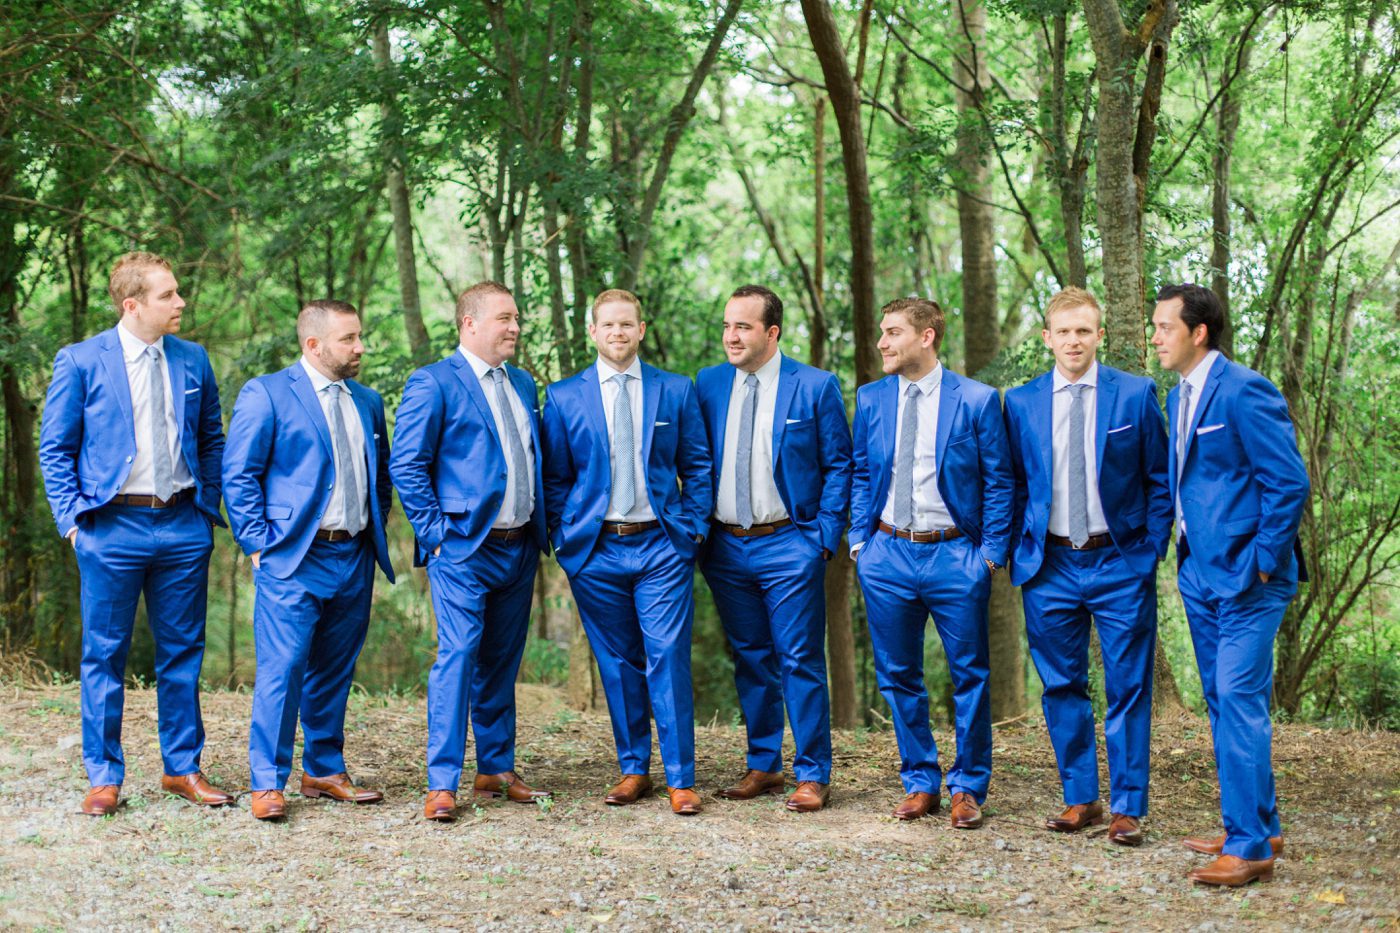 Navy blue suites and brown shoes for groom and groomsmen attire. Photo by Catherine Ann Photography